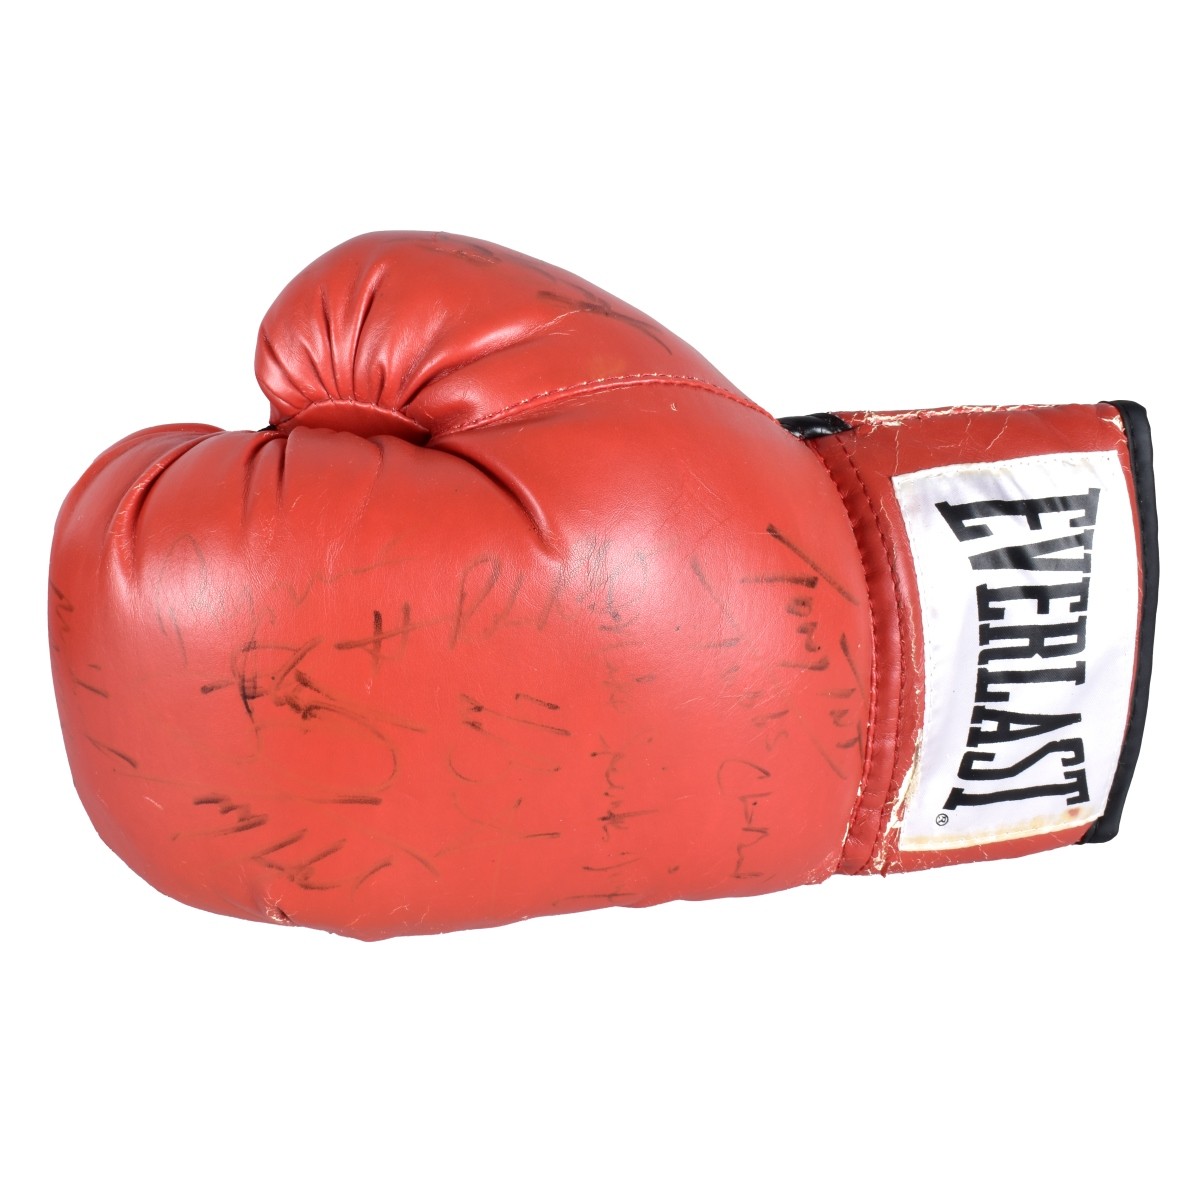 Autographed Everlast Boxing Gloves